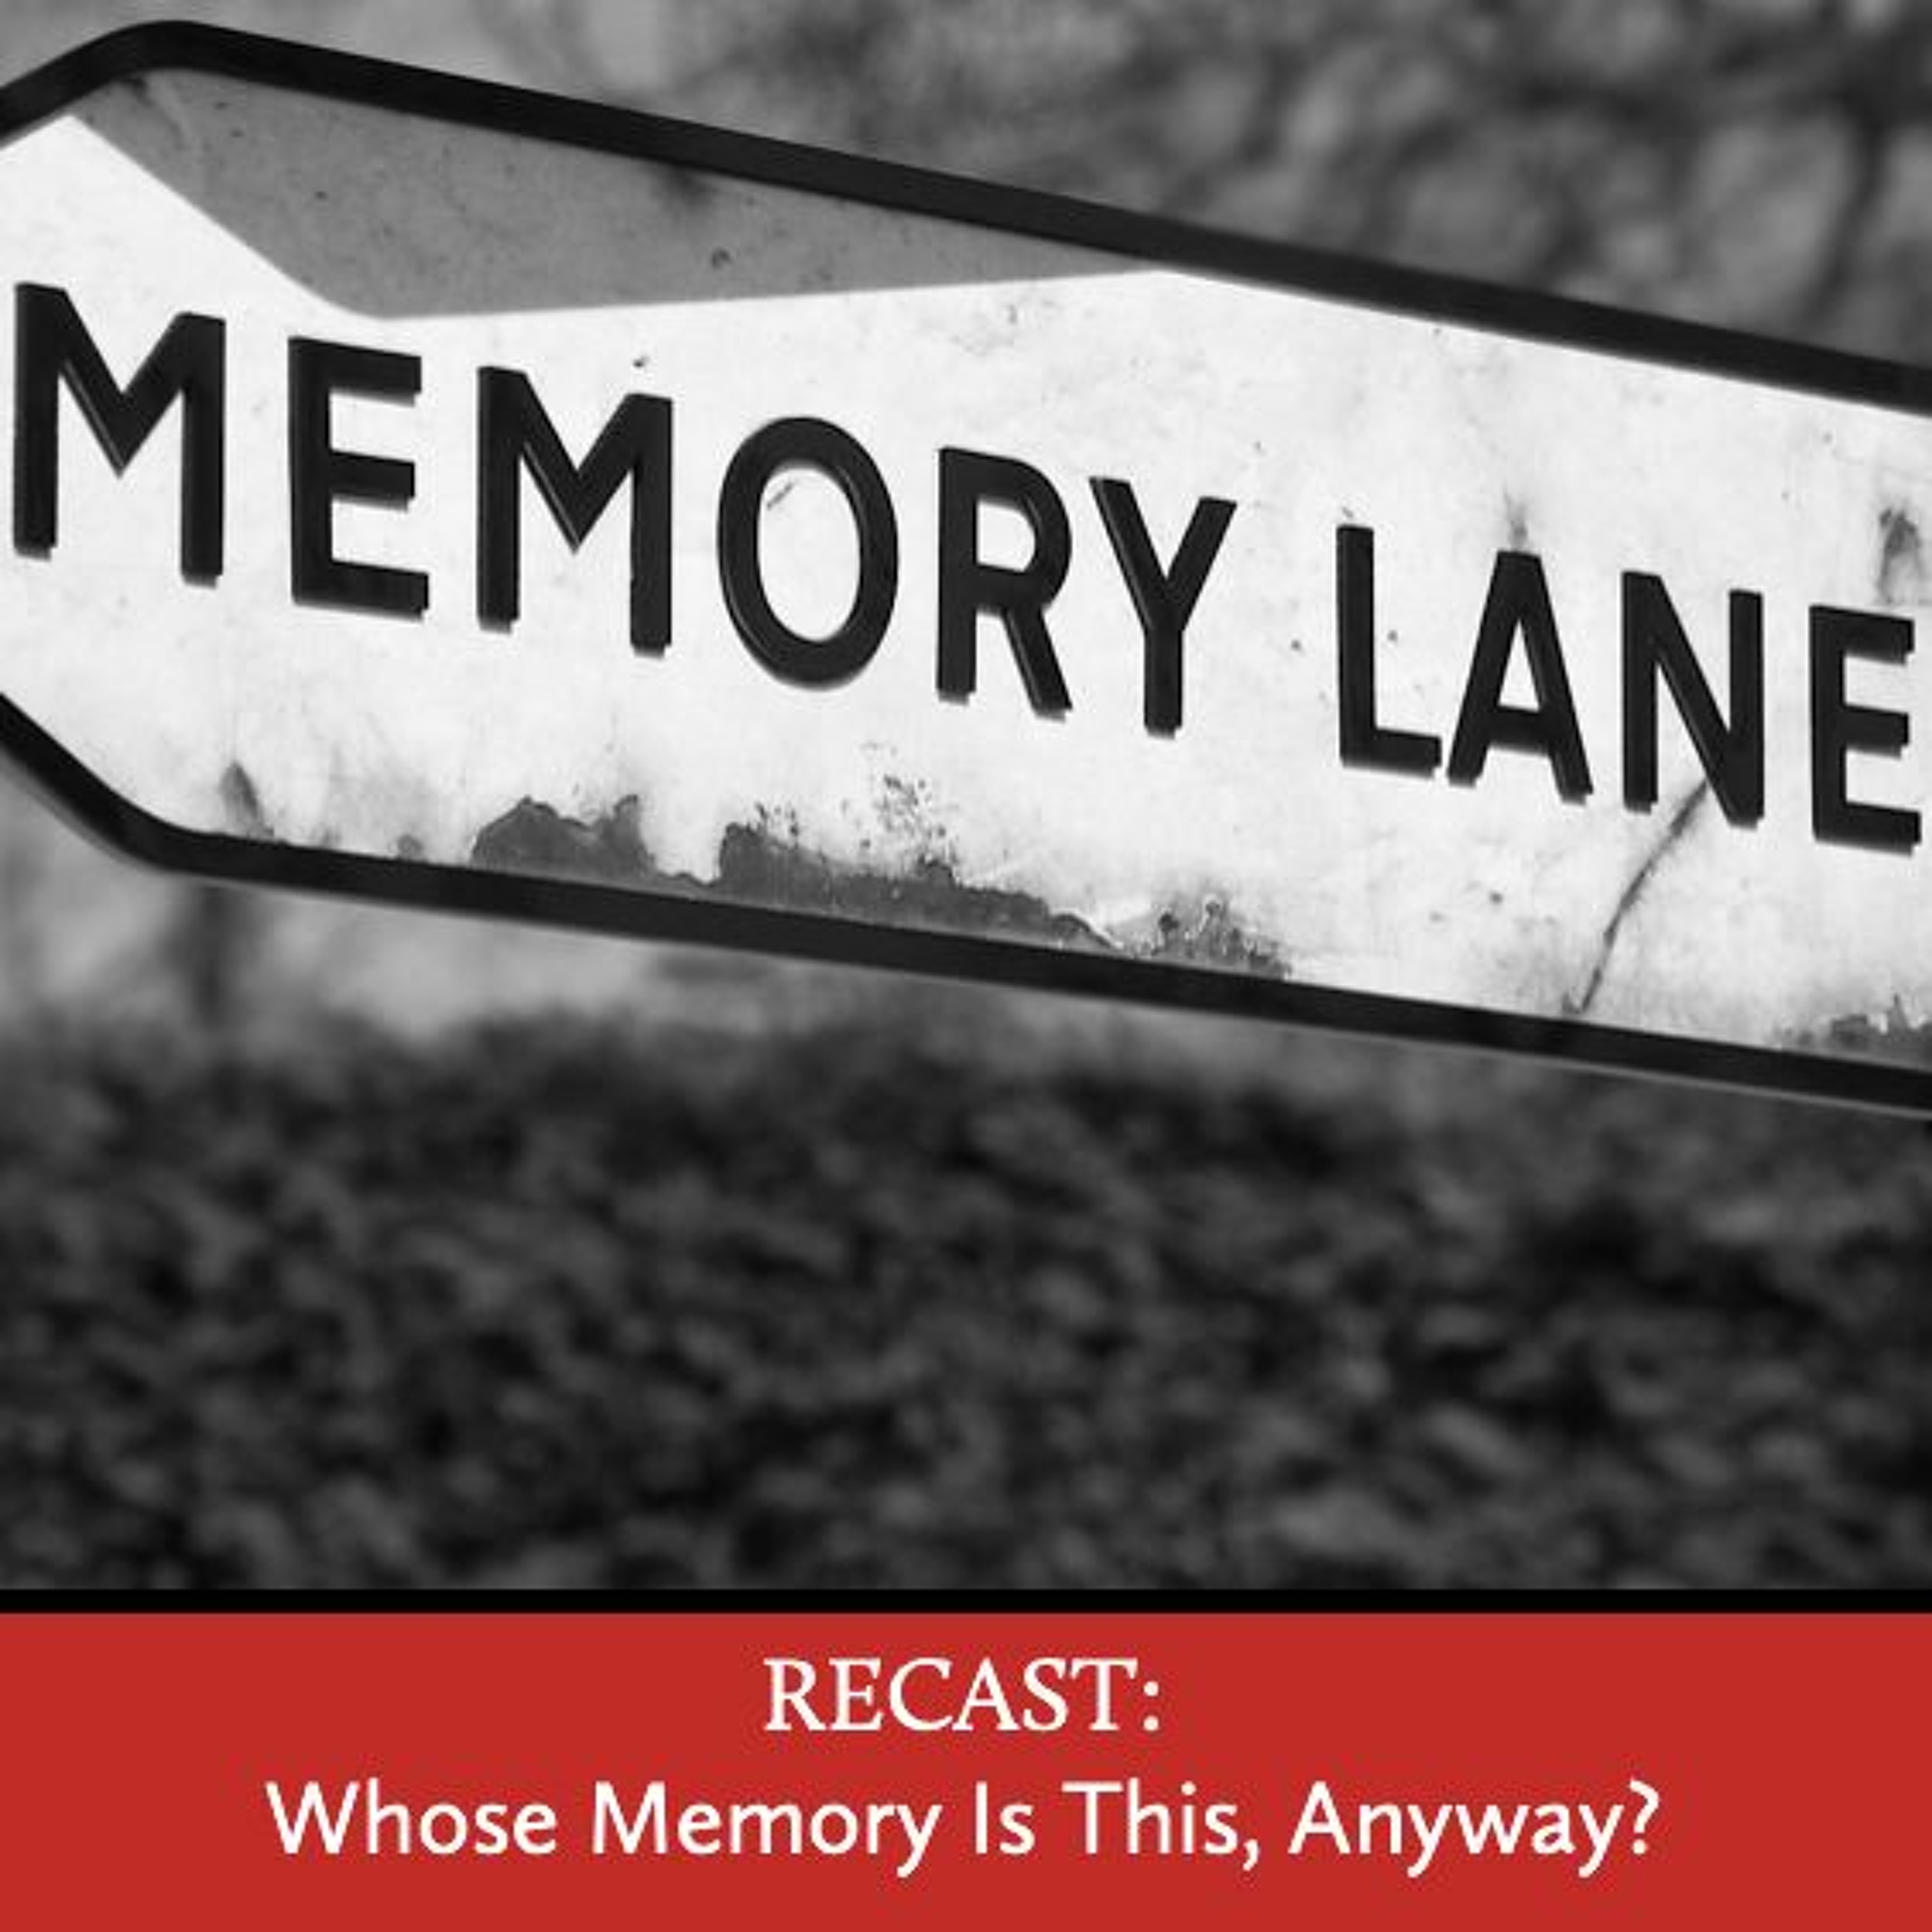 RECAST: Whose Memory Is This, Anyway?